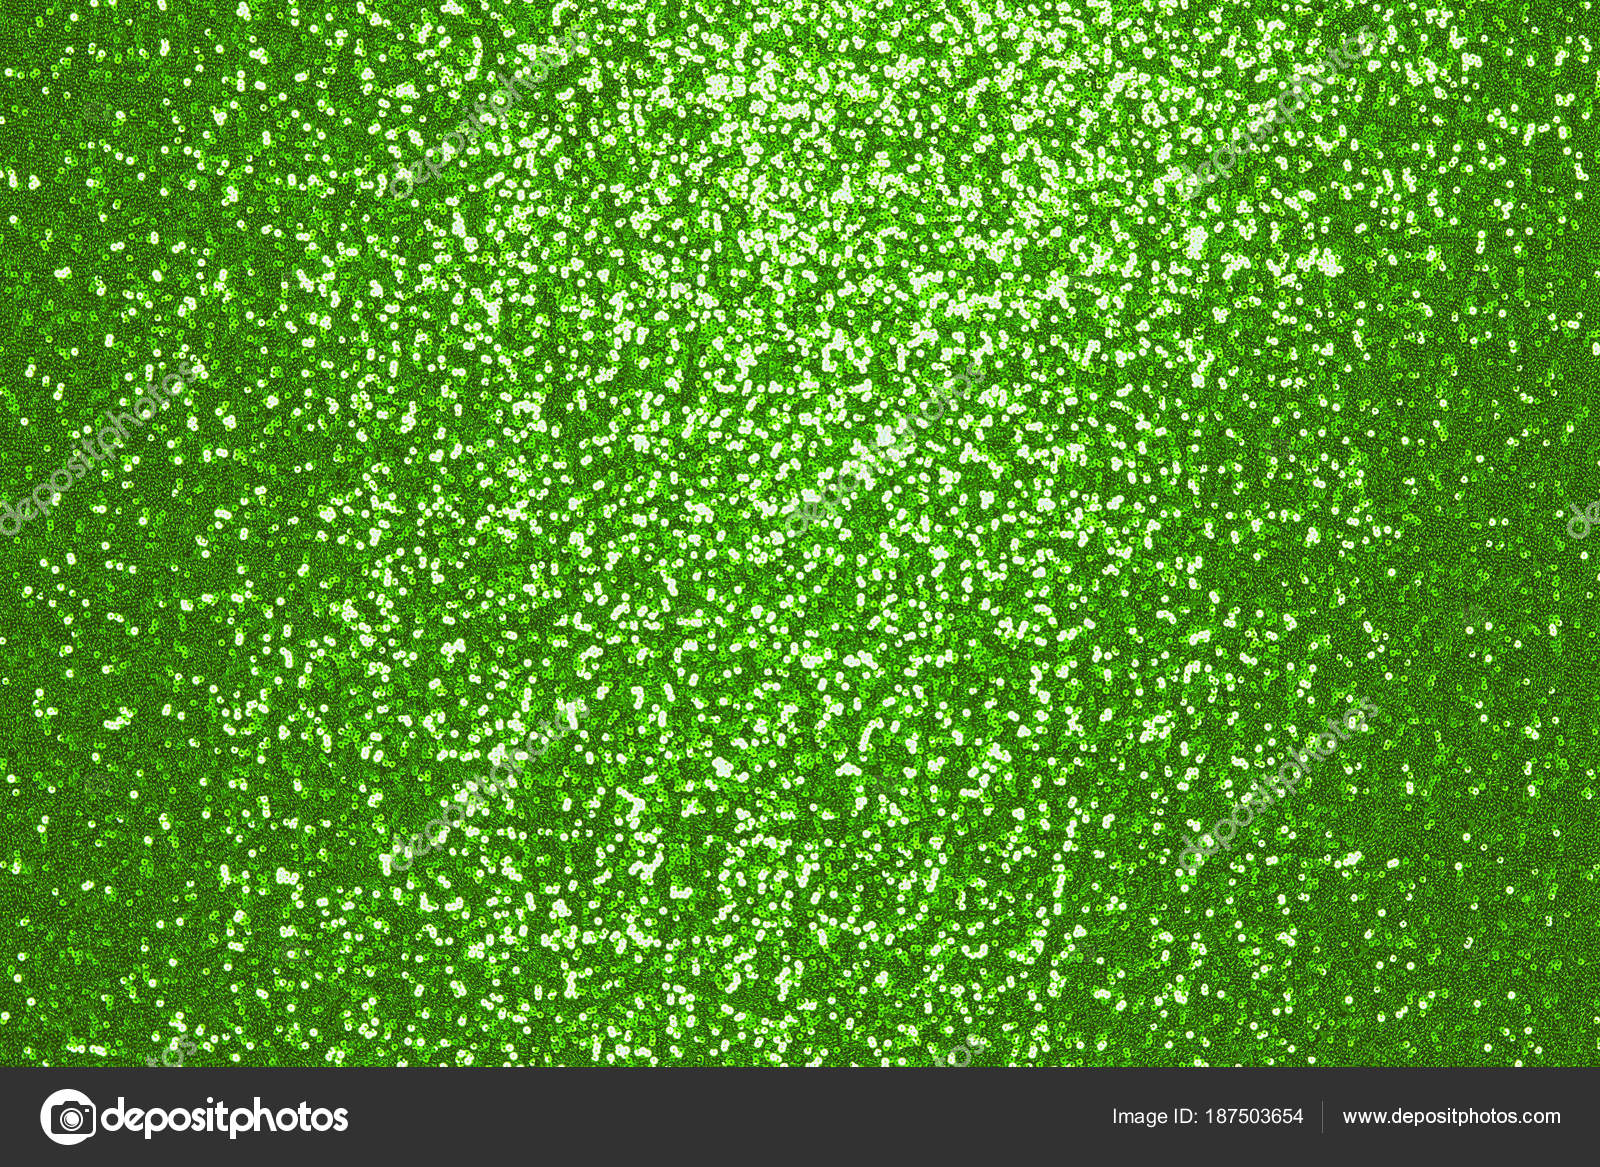 Sparkling green sequin textile background Stock Photo by